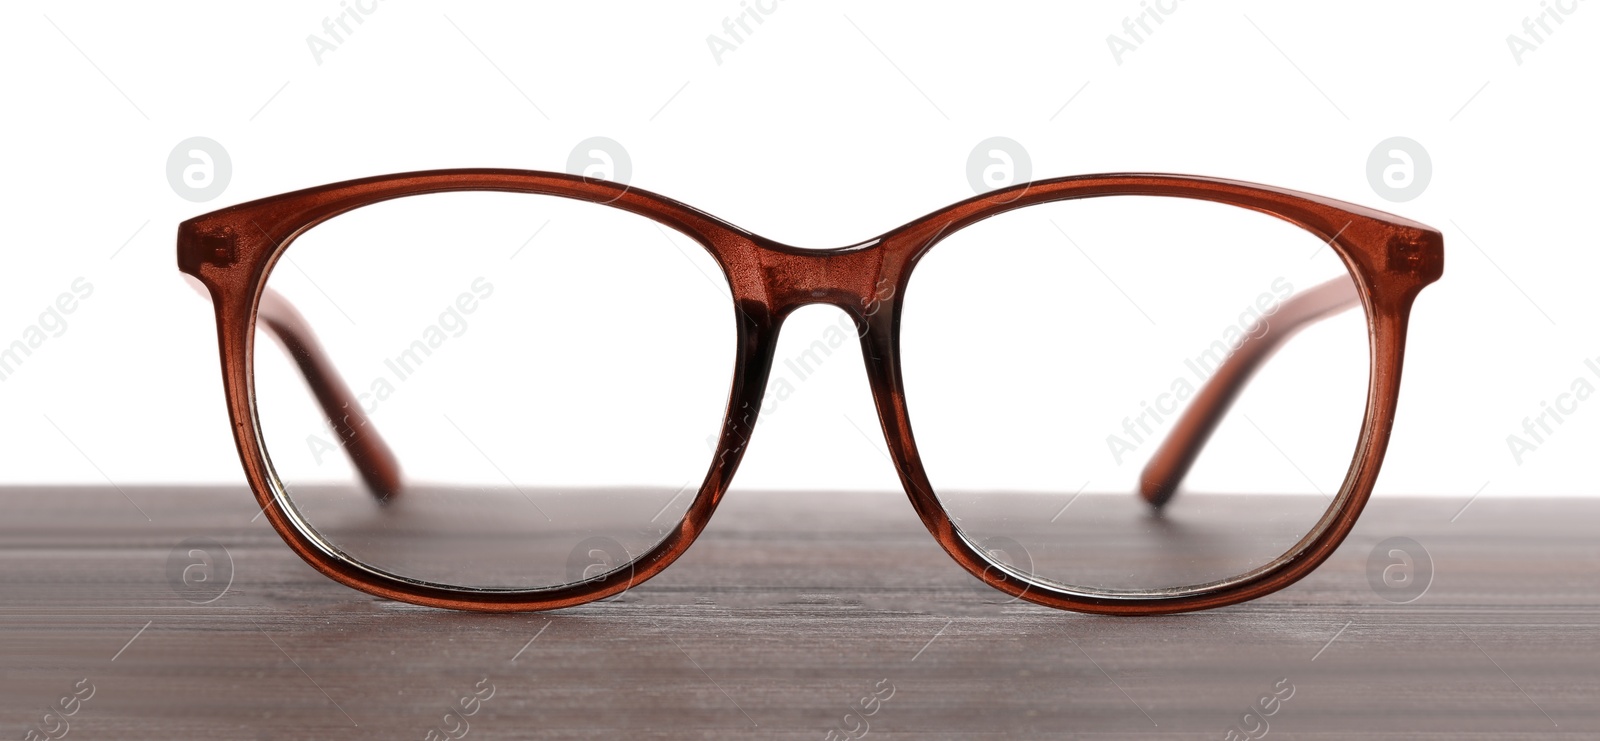 Photo of Stylish glasses with brown frame on wooden table against white background